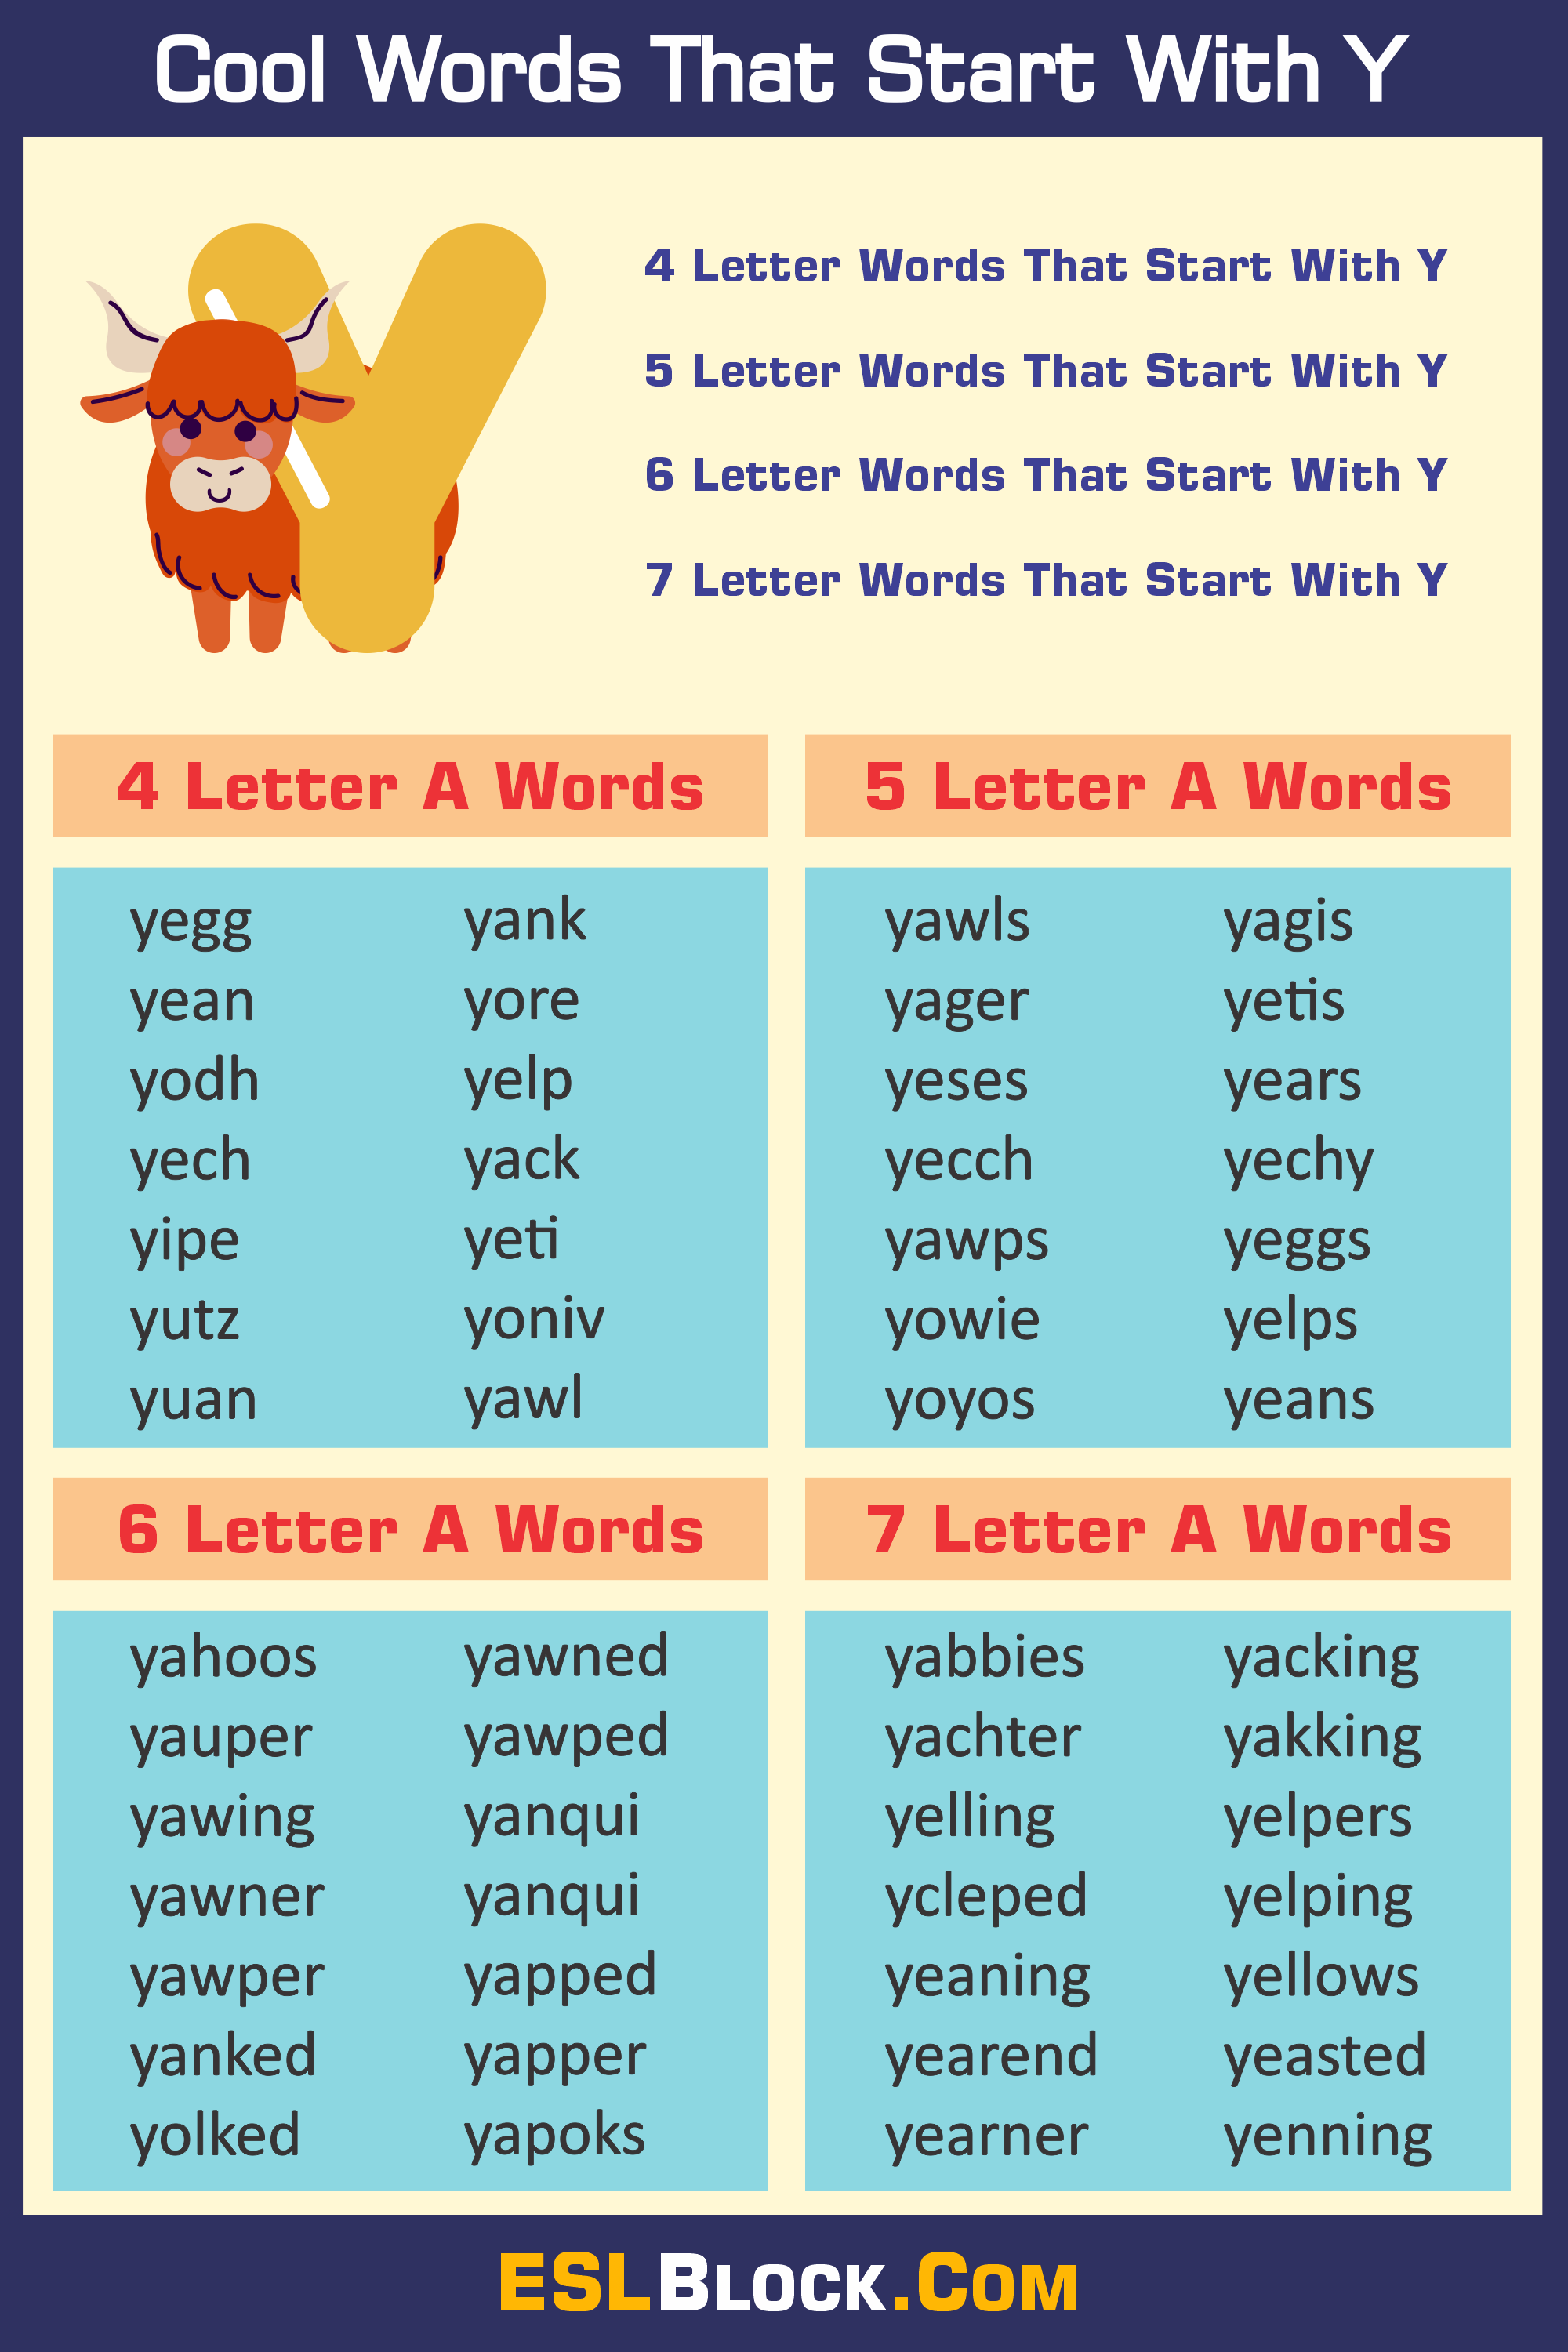 4 Letter Words, 4 Letter Words That Start With Y, 5 Letter Words, 5 Letter Words That Start With Y, 6 Letter Words, 6 Letter Words That Start With Y, 7 Letter Words, 7 Letter Words That Start With Y, Awesome Cool Words, Christmas Words That Start With Y, Cool Words, Describing Words That Start With Y, Descriptive Words That Start With Y, English Words, Five Letter Words Starting with Y, Good Words That Start With Y, Nice Words That Start With Y, Positive Words That Start With Y, Unique Words, Word Dictionary, Words That Start With Y, Words That Start With Y to Describe Someone, Y Words